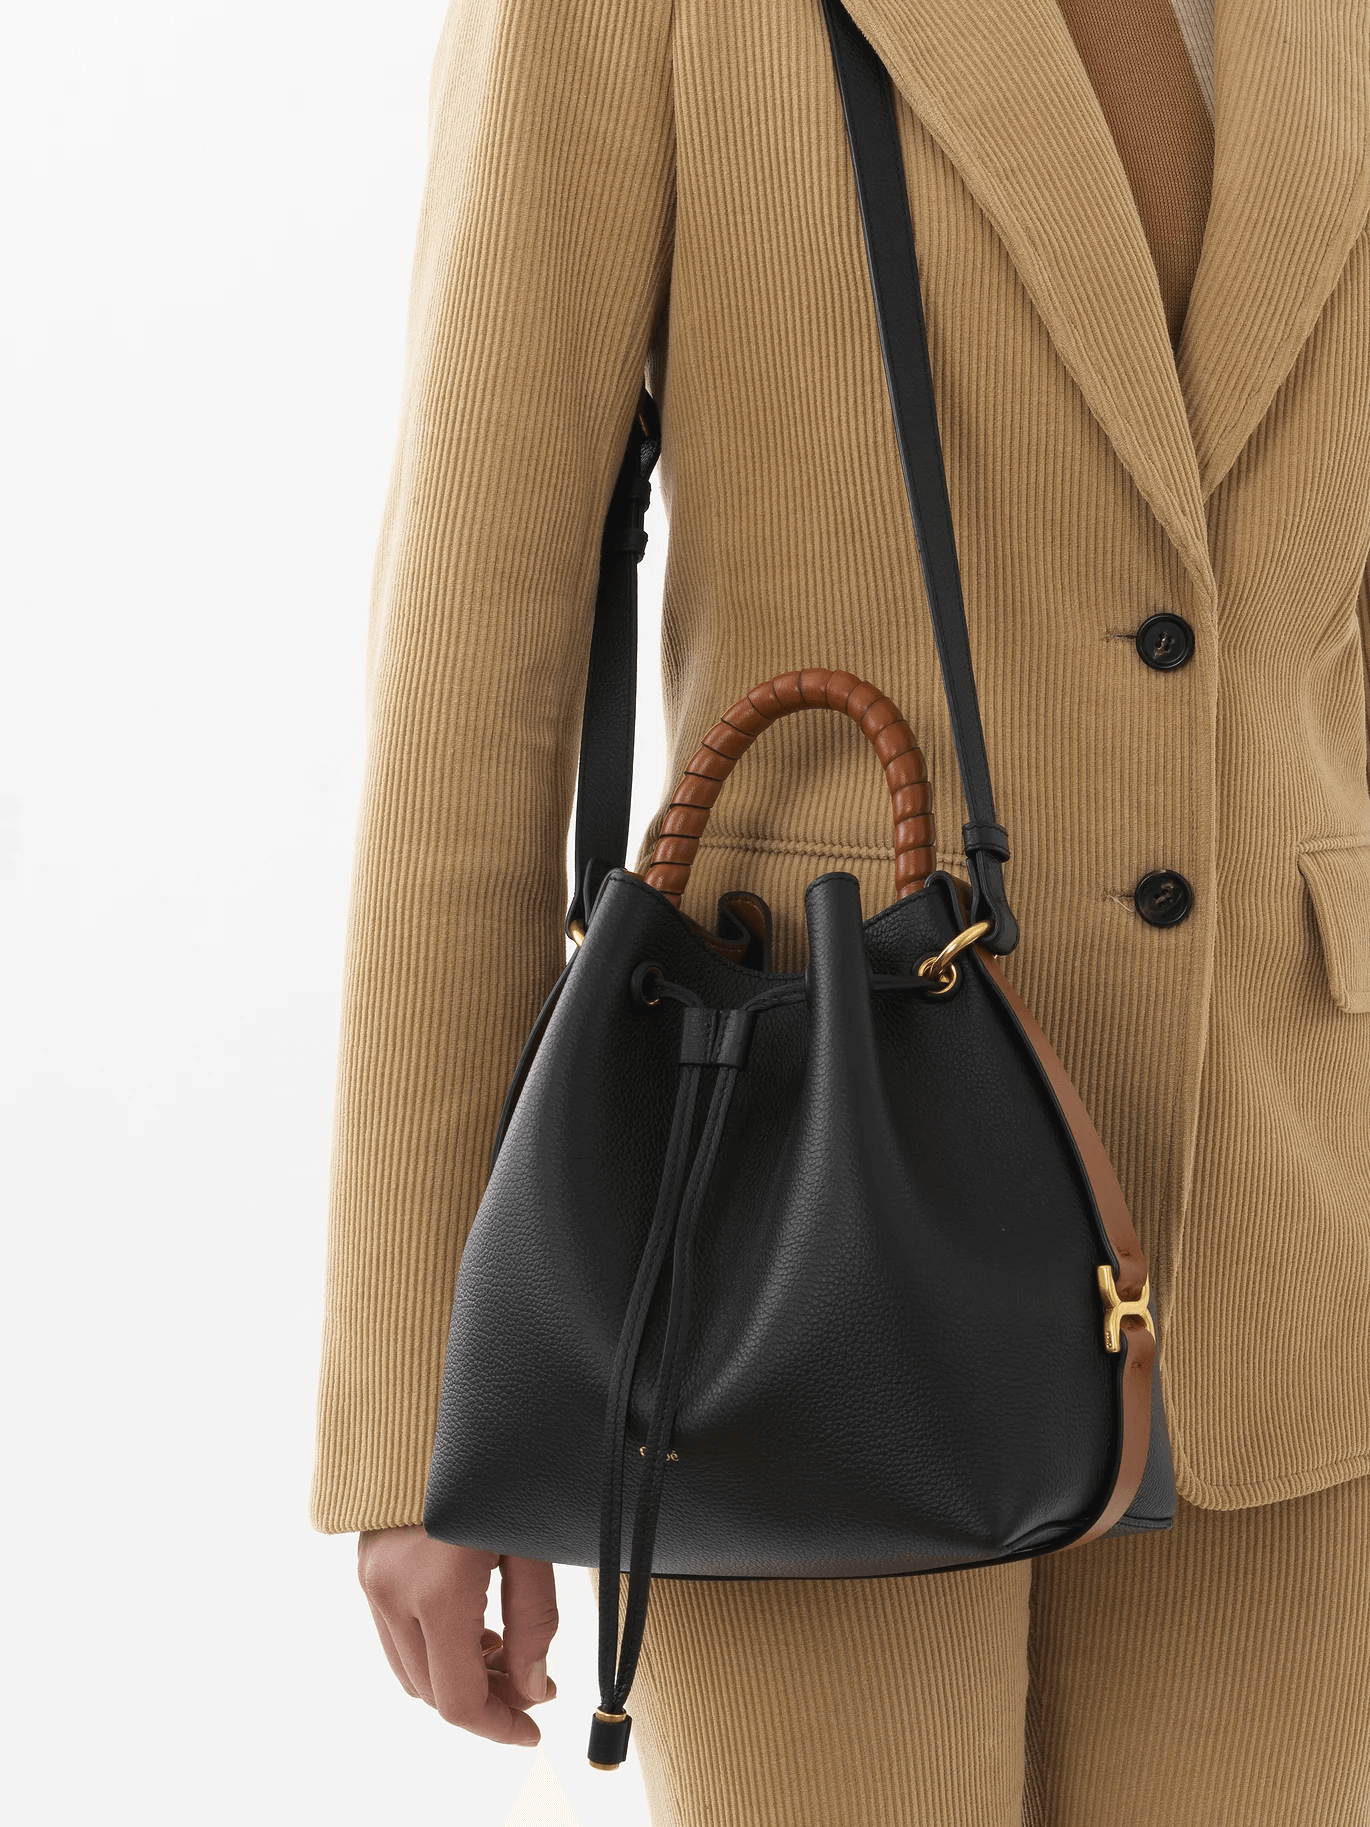 Chloé Marcie Bucket Bag in Black available at The New Trend Australia.